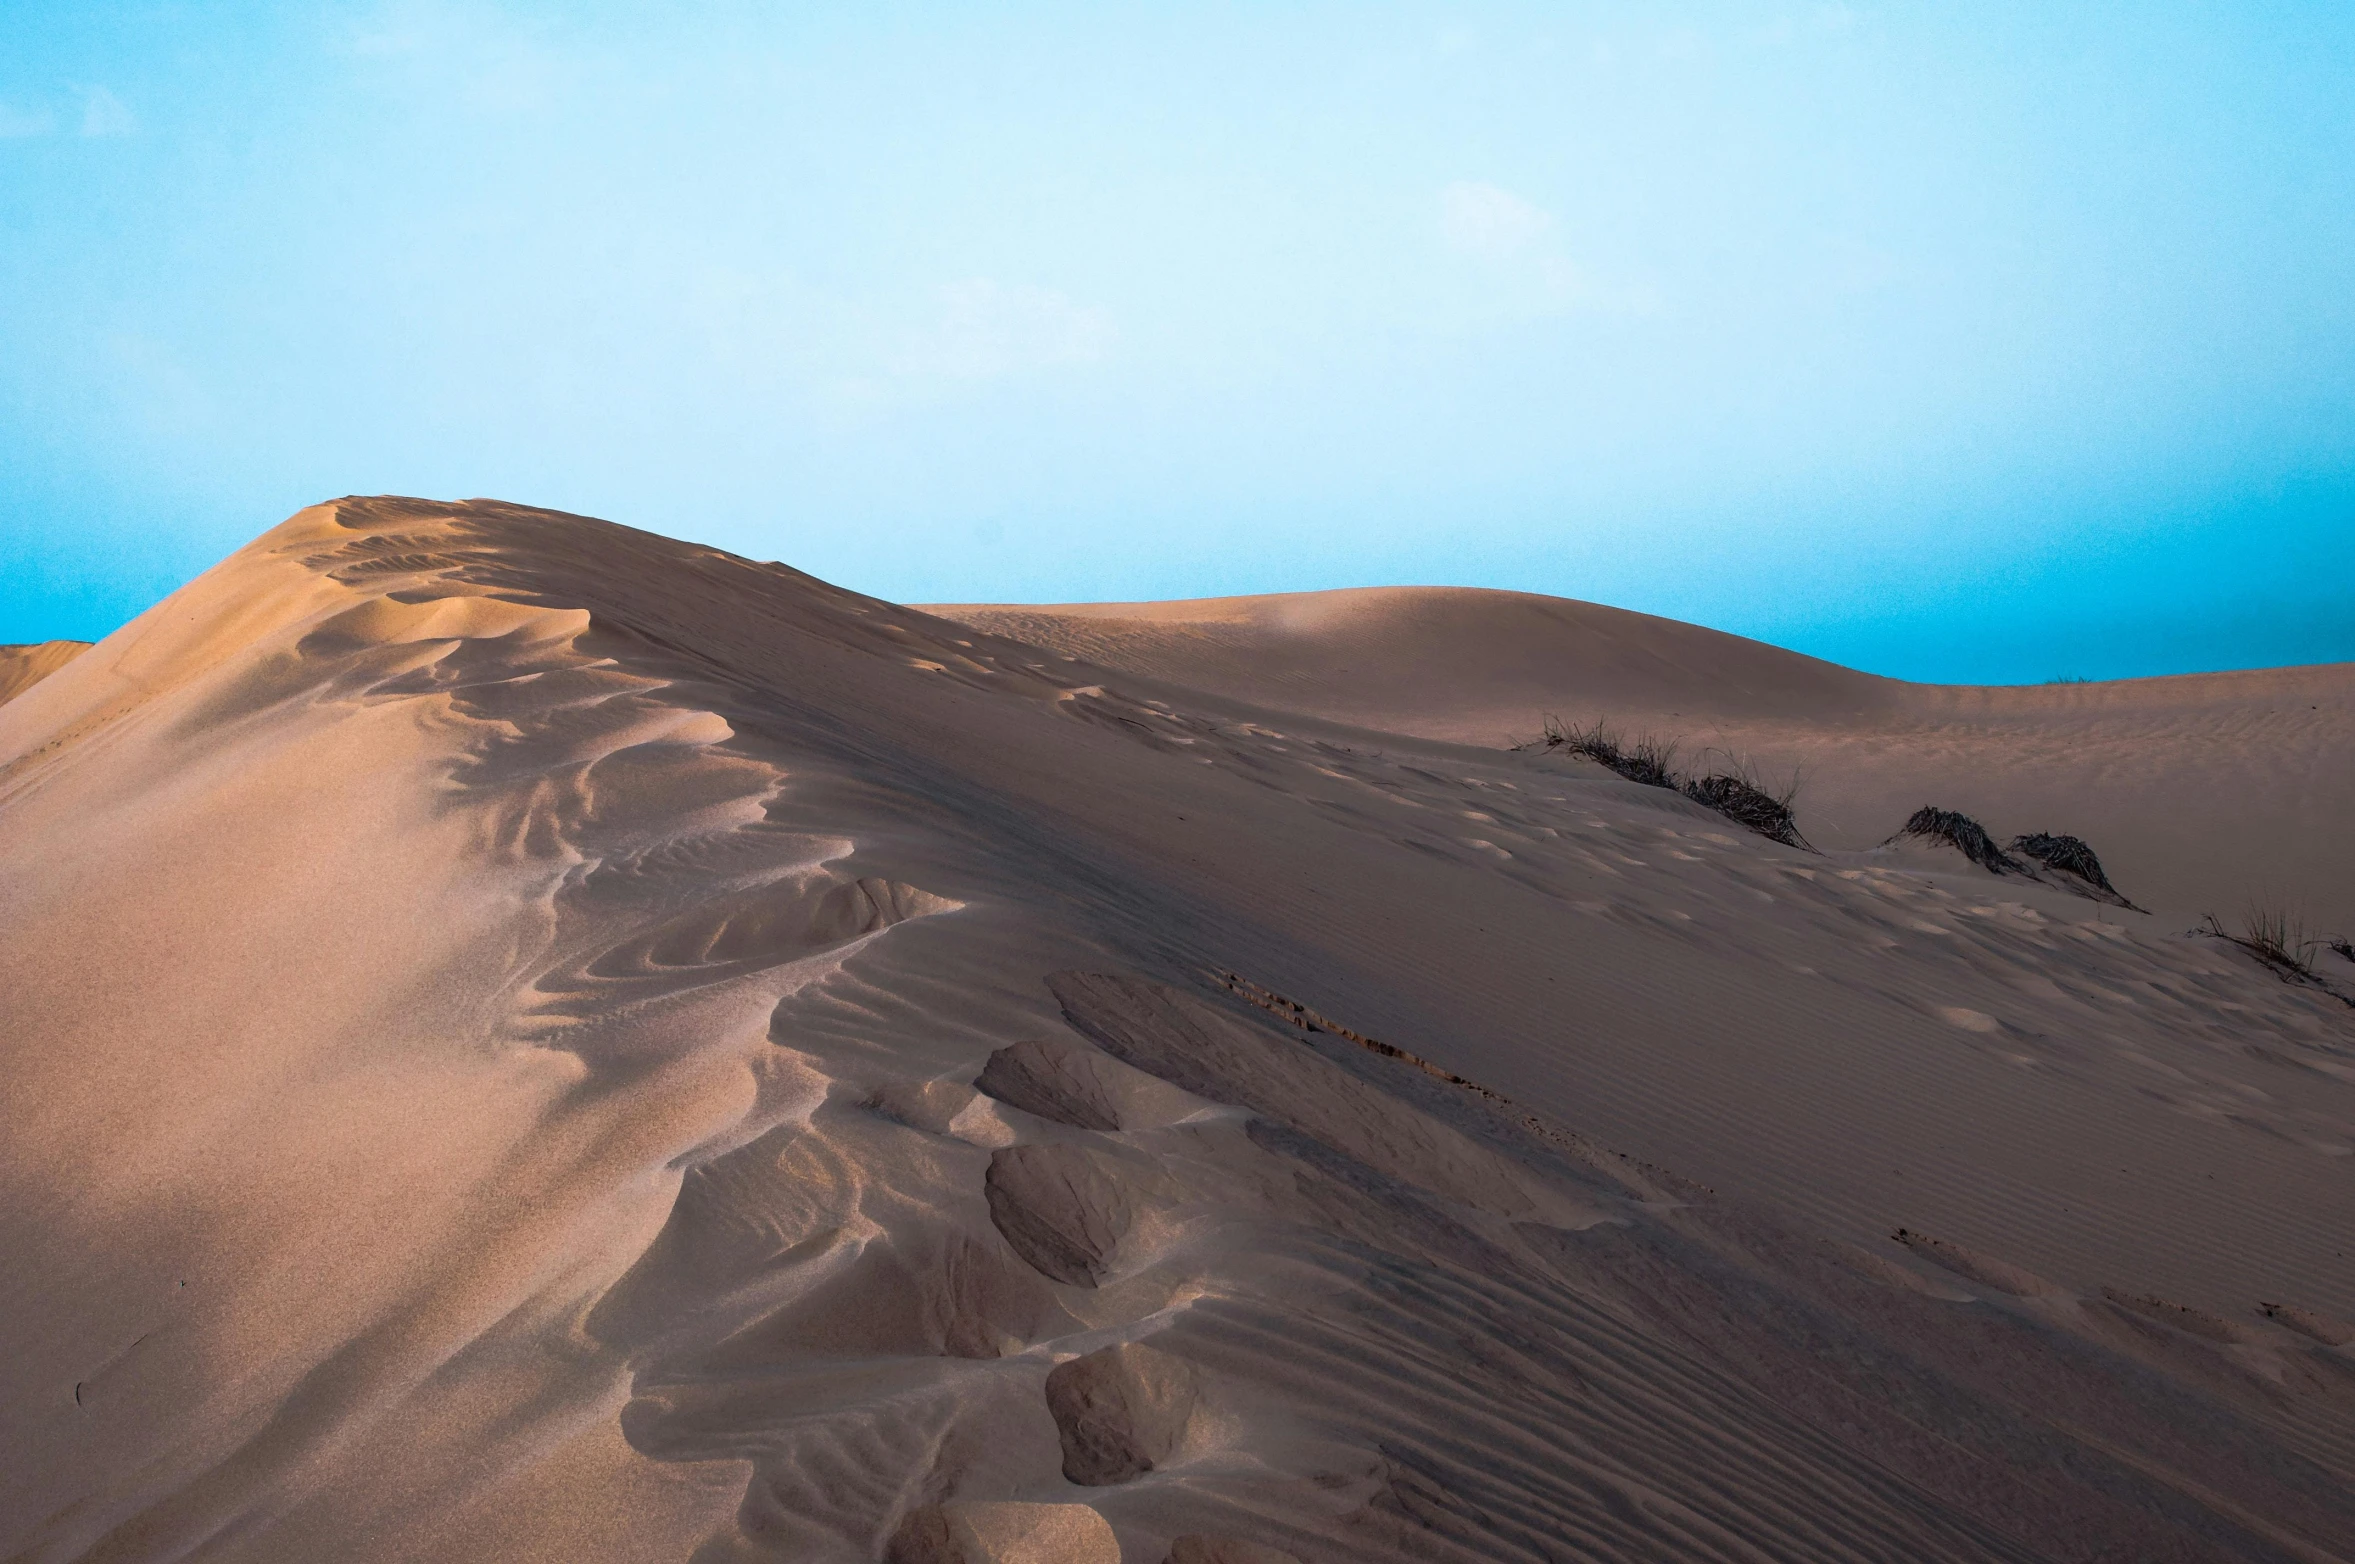 a person standing on top of a sand dune, quixel megascans, on a canva, sinuous, instagram post